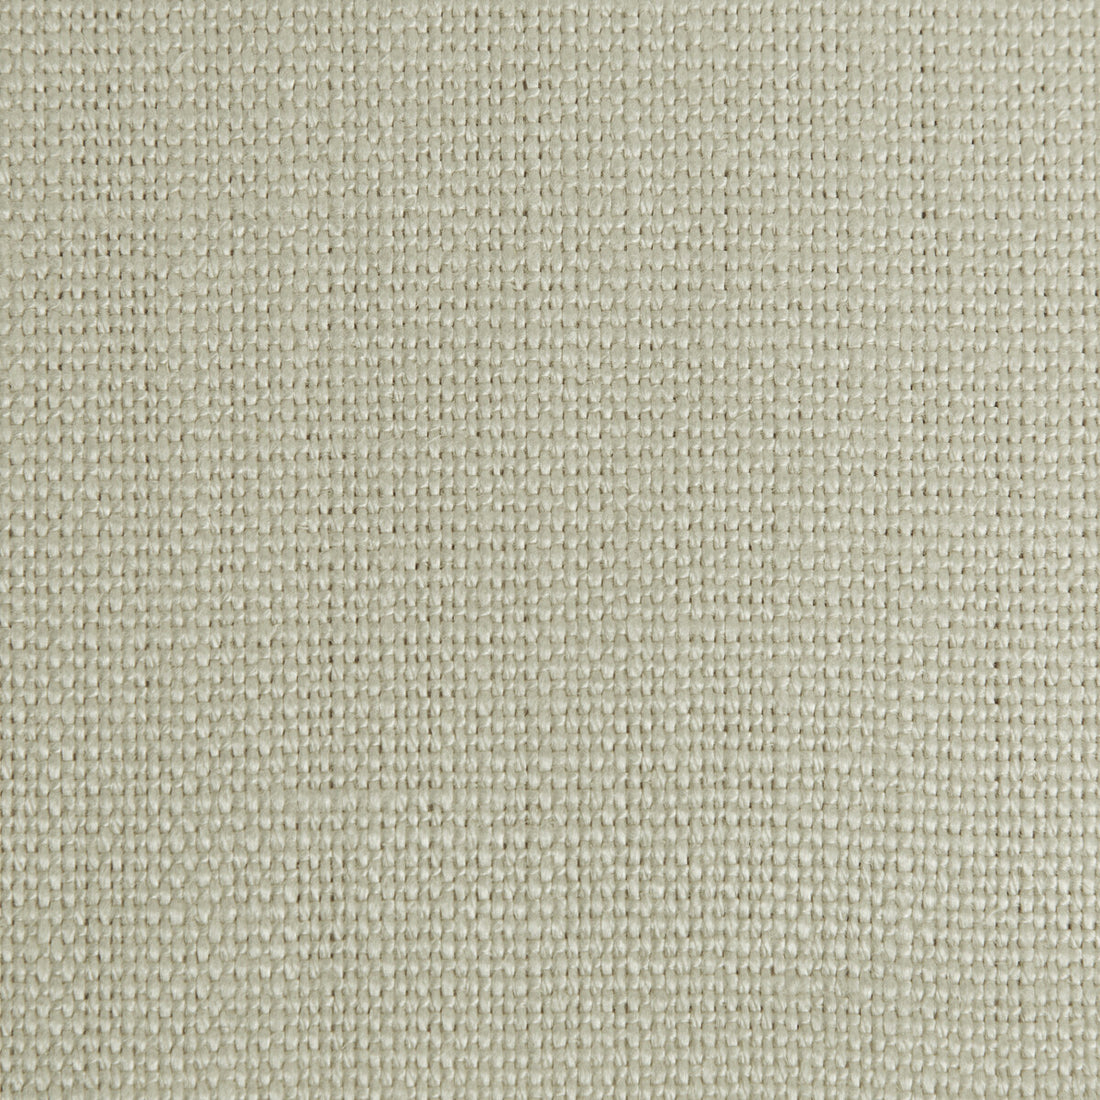 Stone Harbor fabric in silver color - pattern 27591.2211.0 - by Kravet Basics in the The Complete Linen IV collection